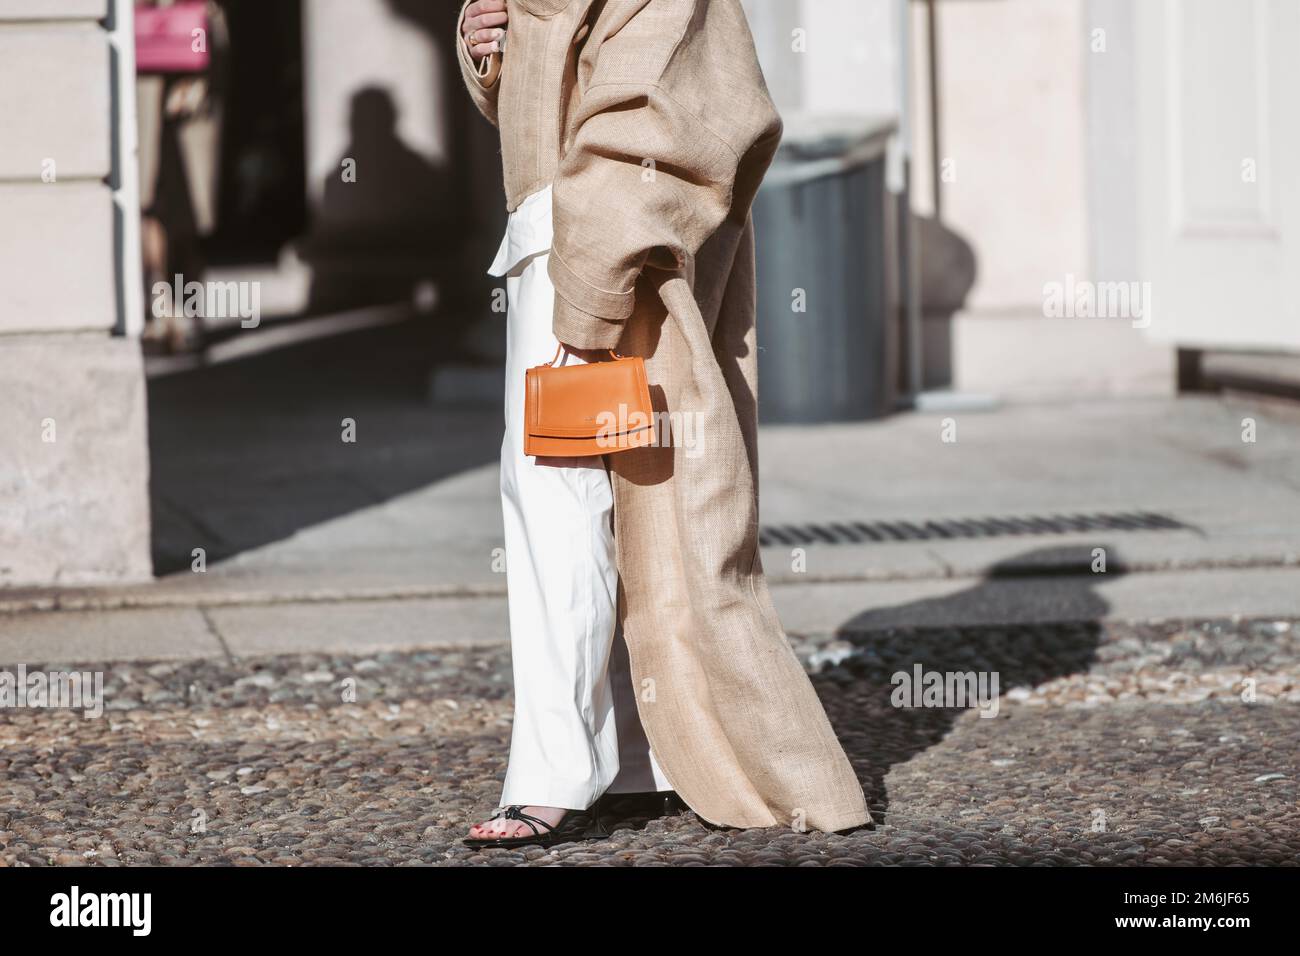 Milan, Italy - February 25, 2022: Street style, woman wearing fashionable outfit. Stock Photo